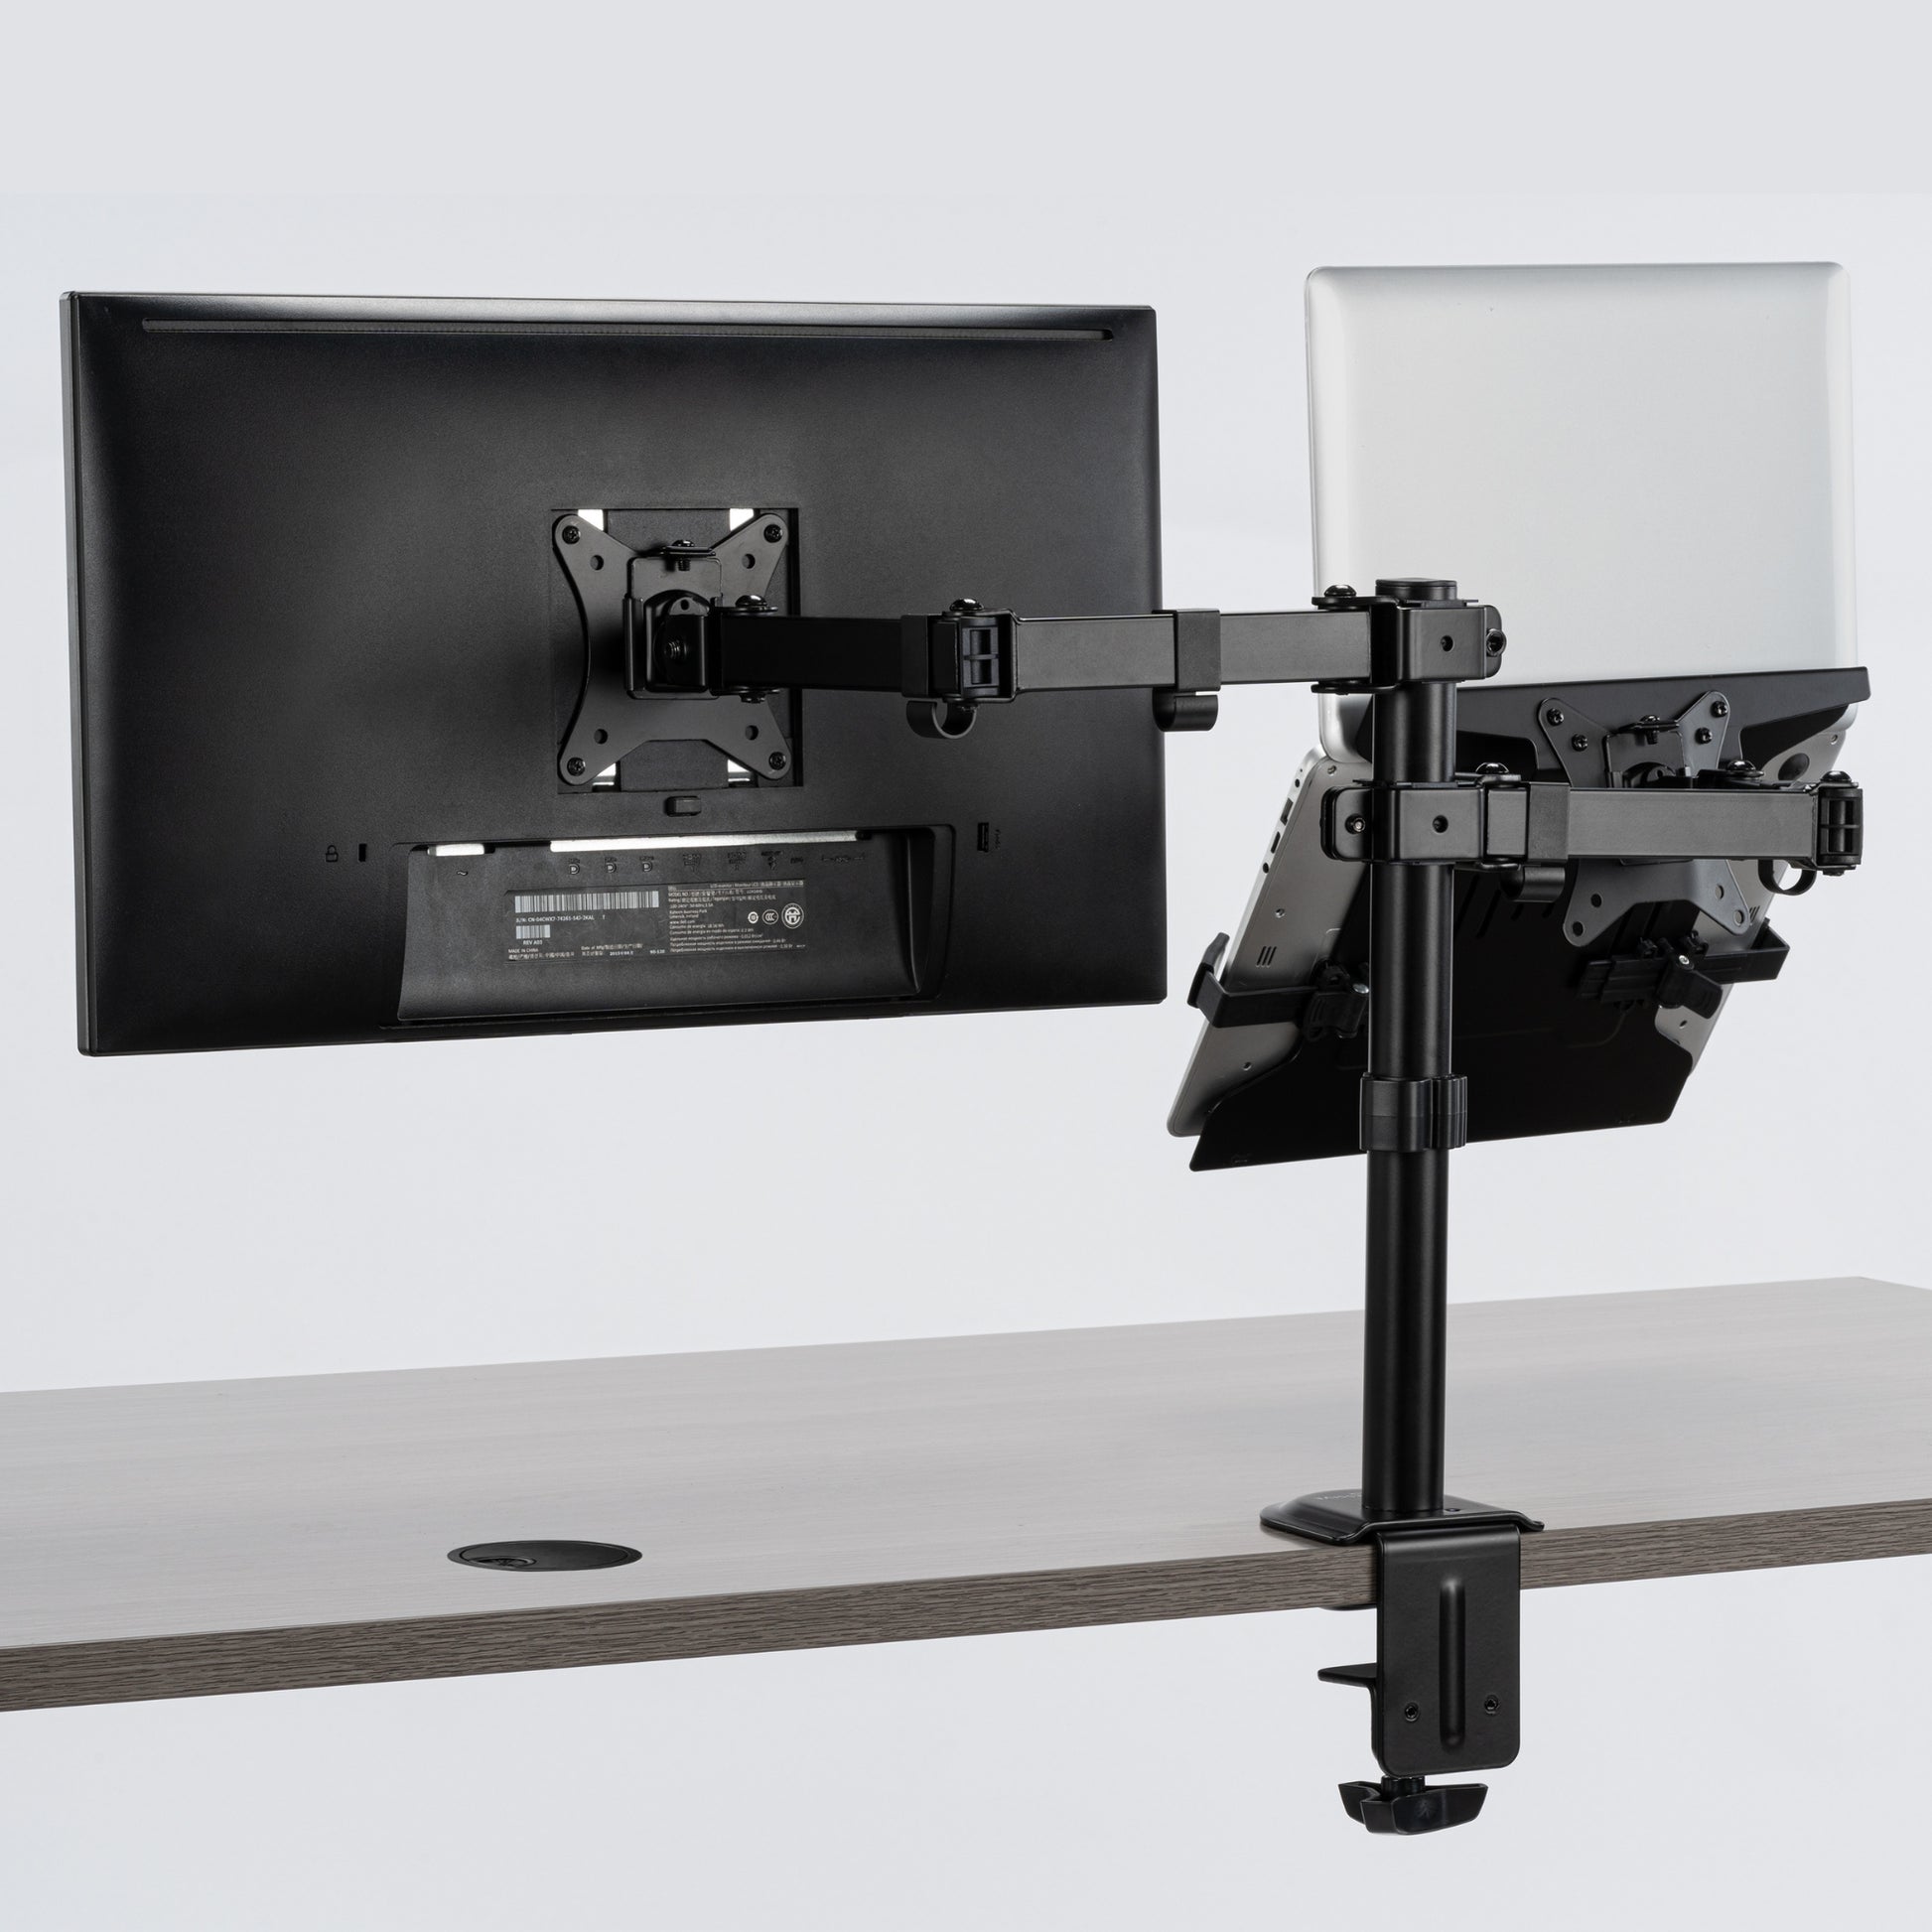 Clip-on attachment extends student workspace